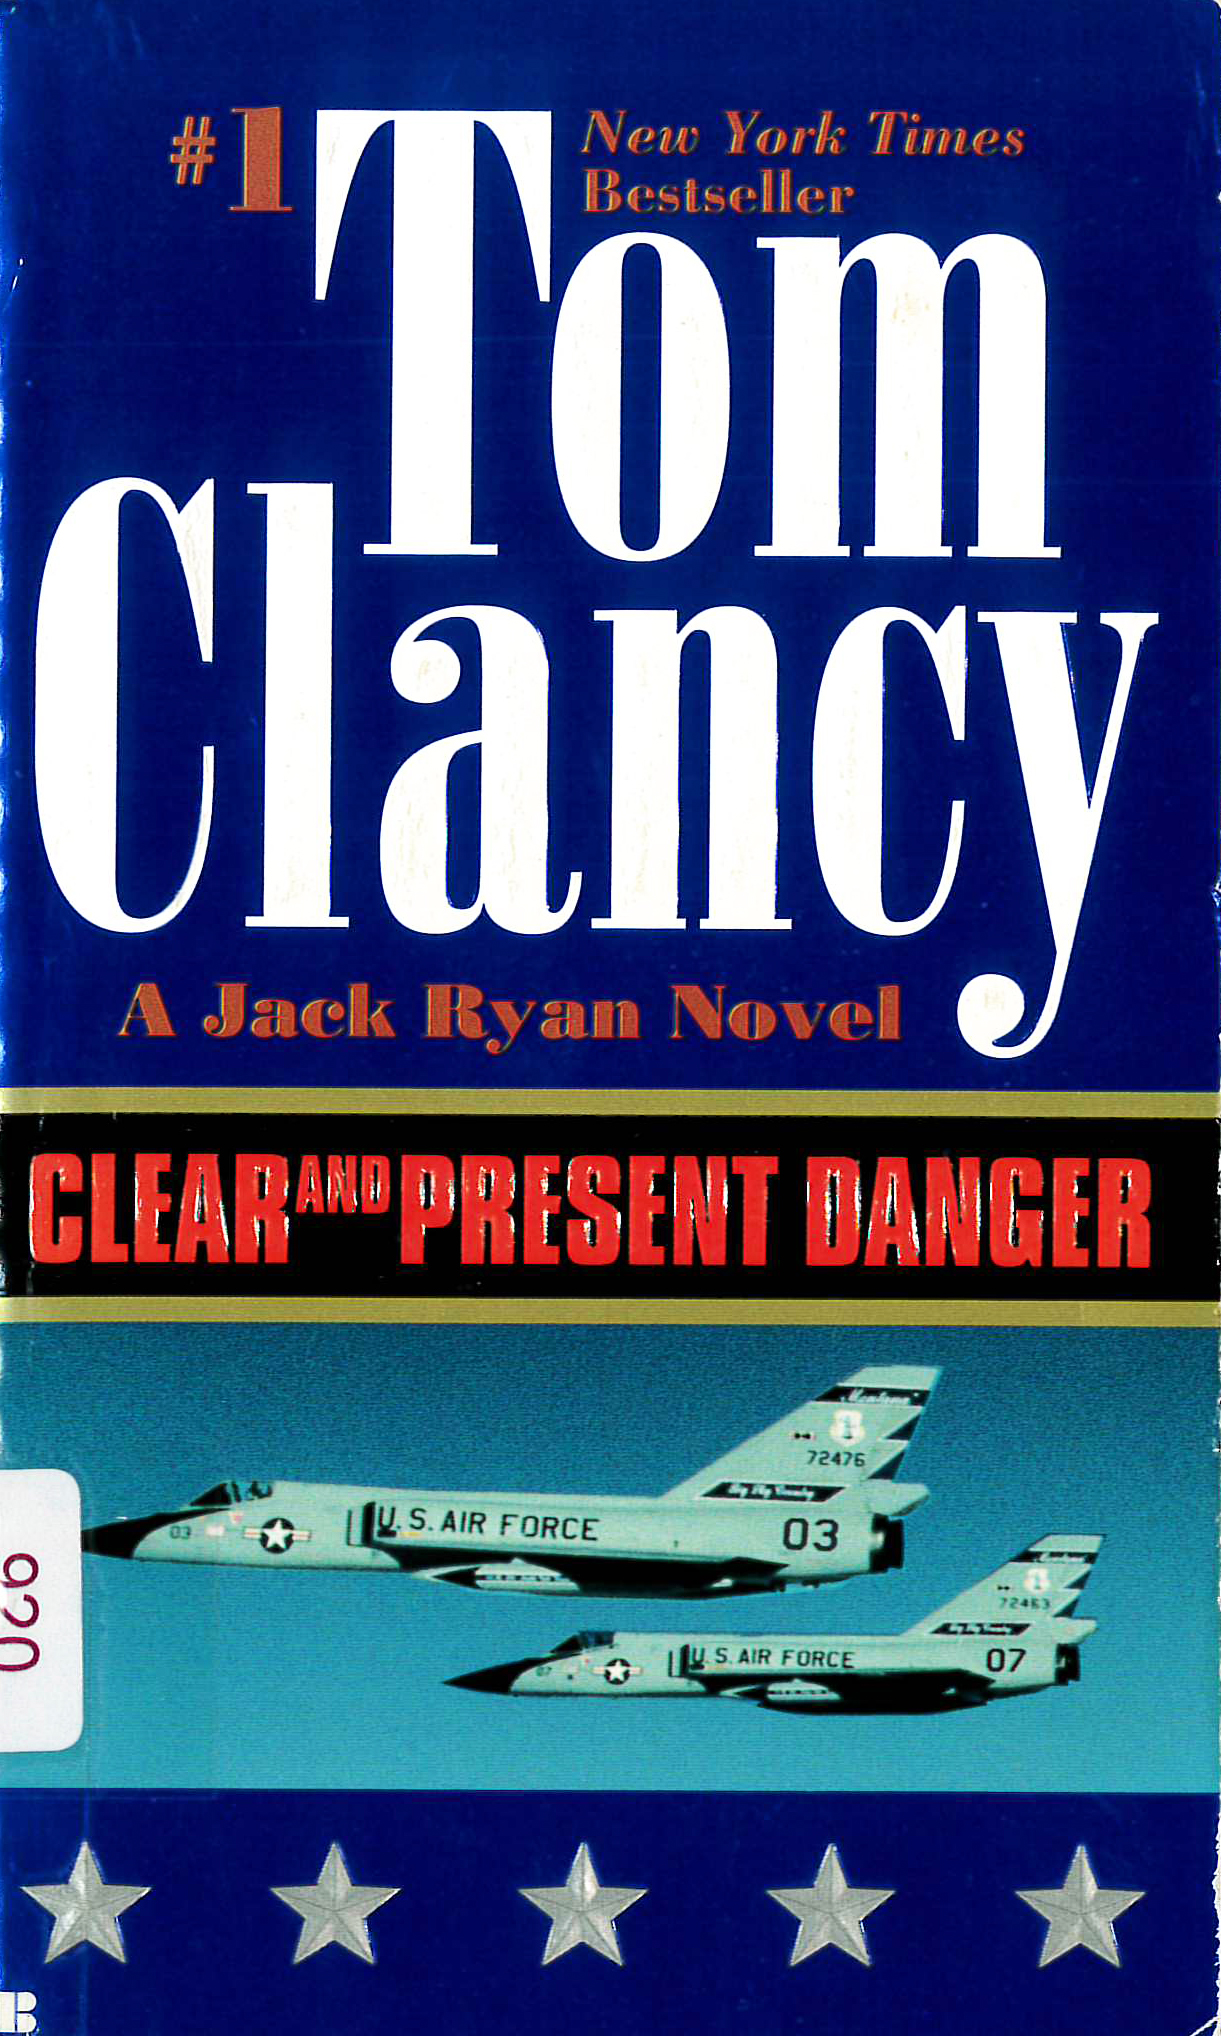 Clear and present danger